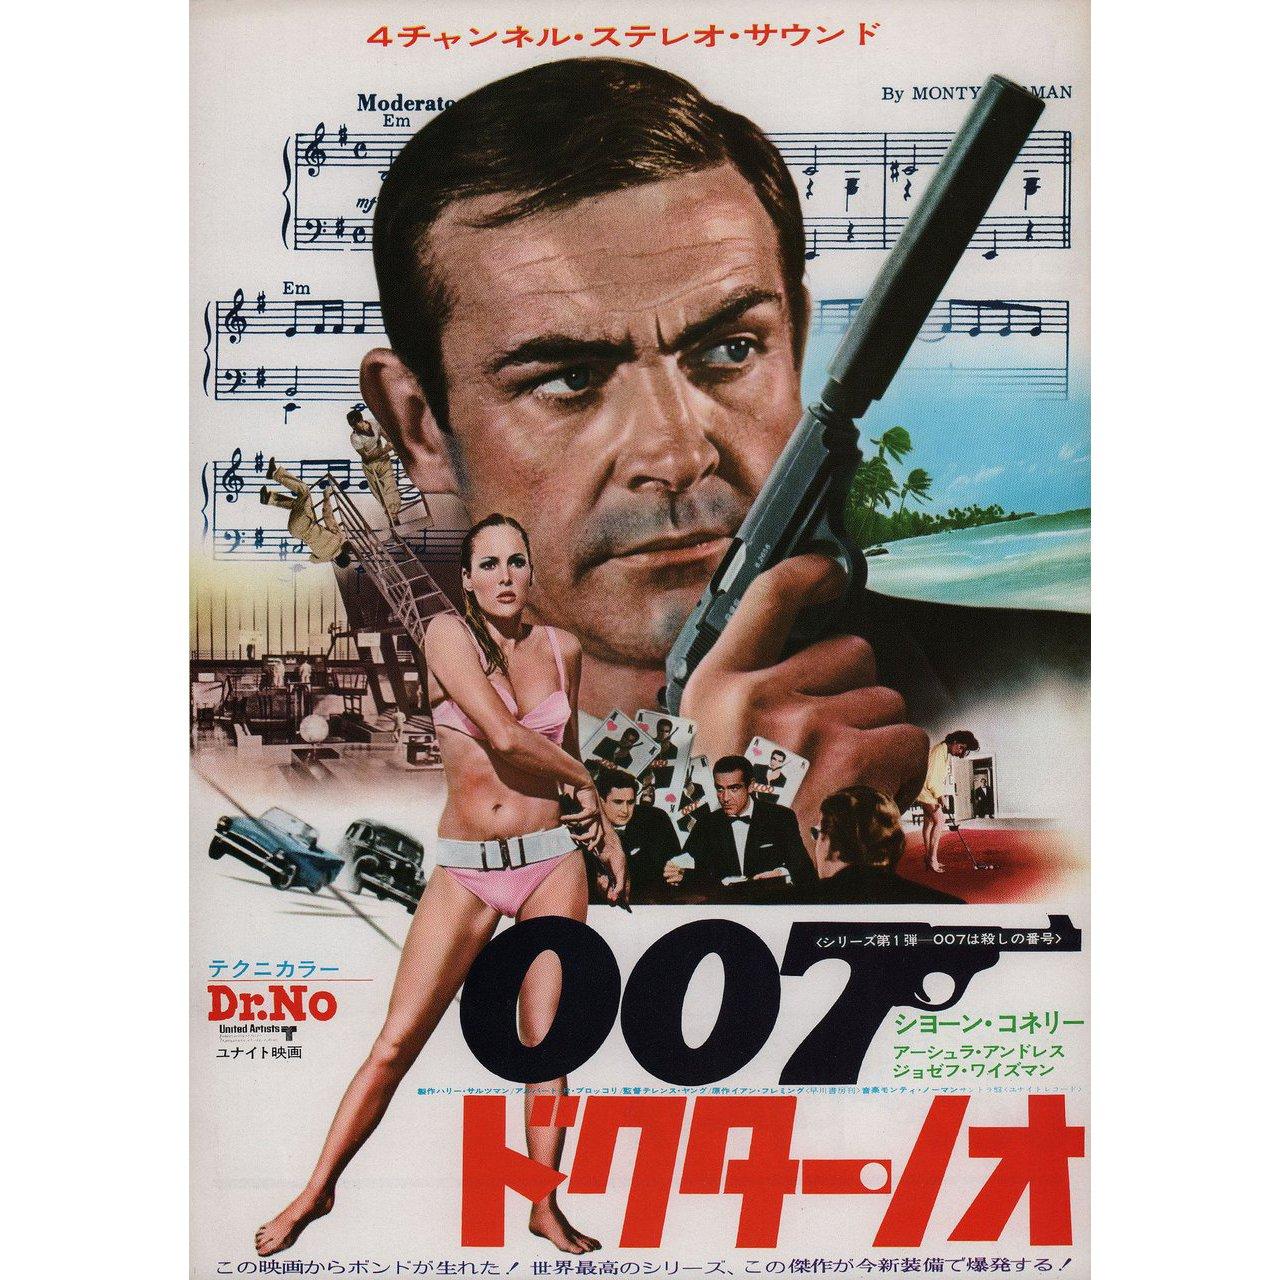 Original 1972 re-release Japanese B5 chirashi flyer for the 1962 film Dr. No directed by Terence Young with Sean Connery / Ursula Andress / Joseph Wiseman / Jack Lord. Fine condition, folded. Many original posters were issued folded or were